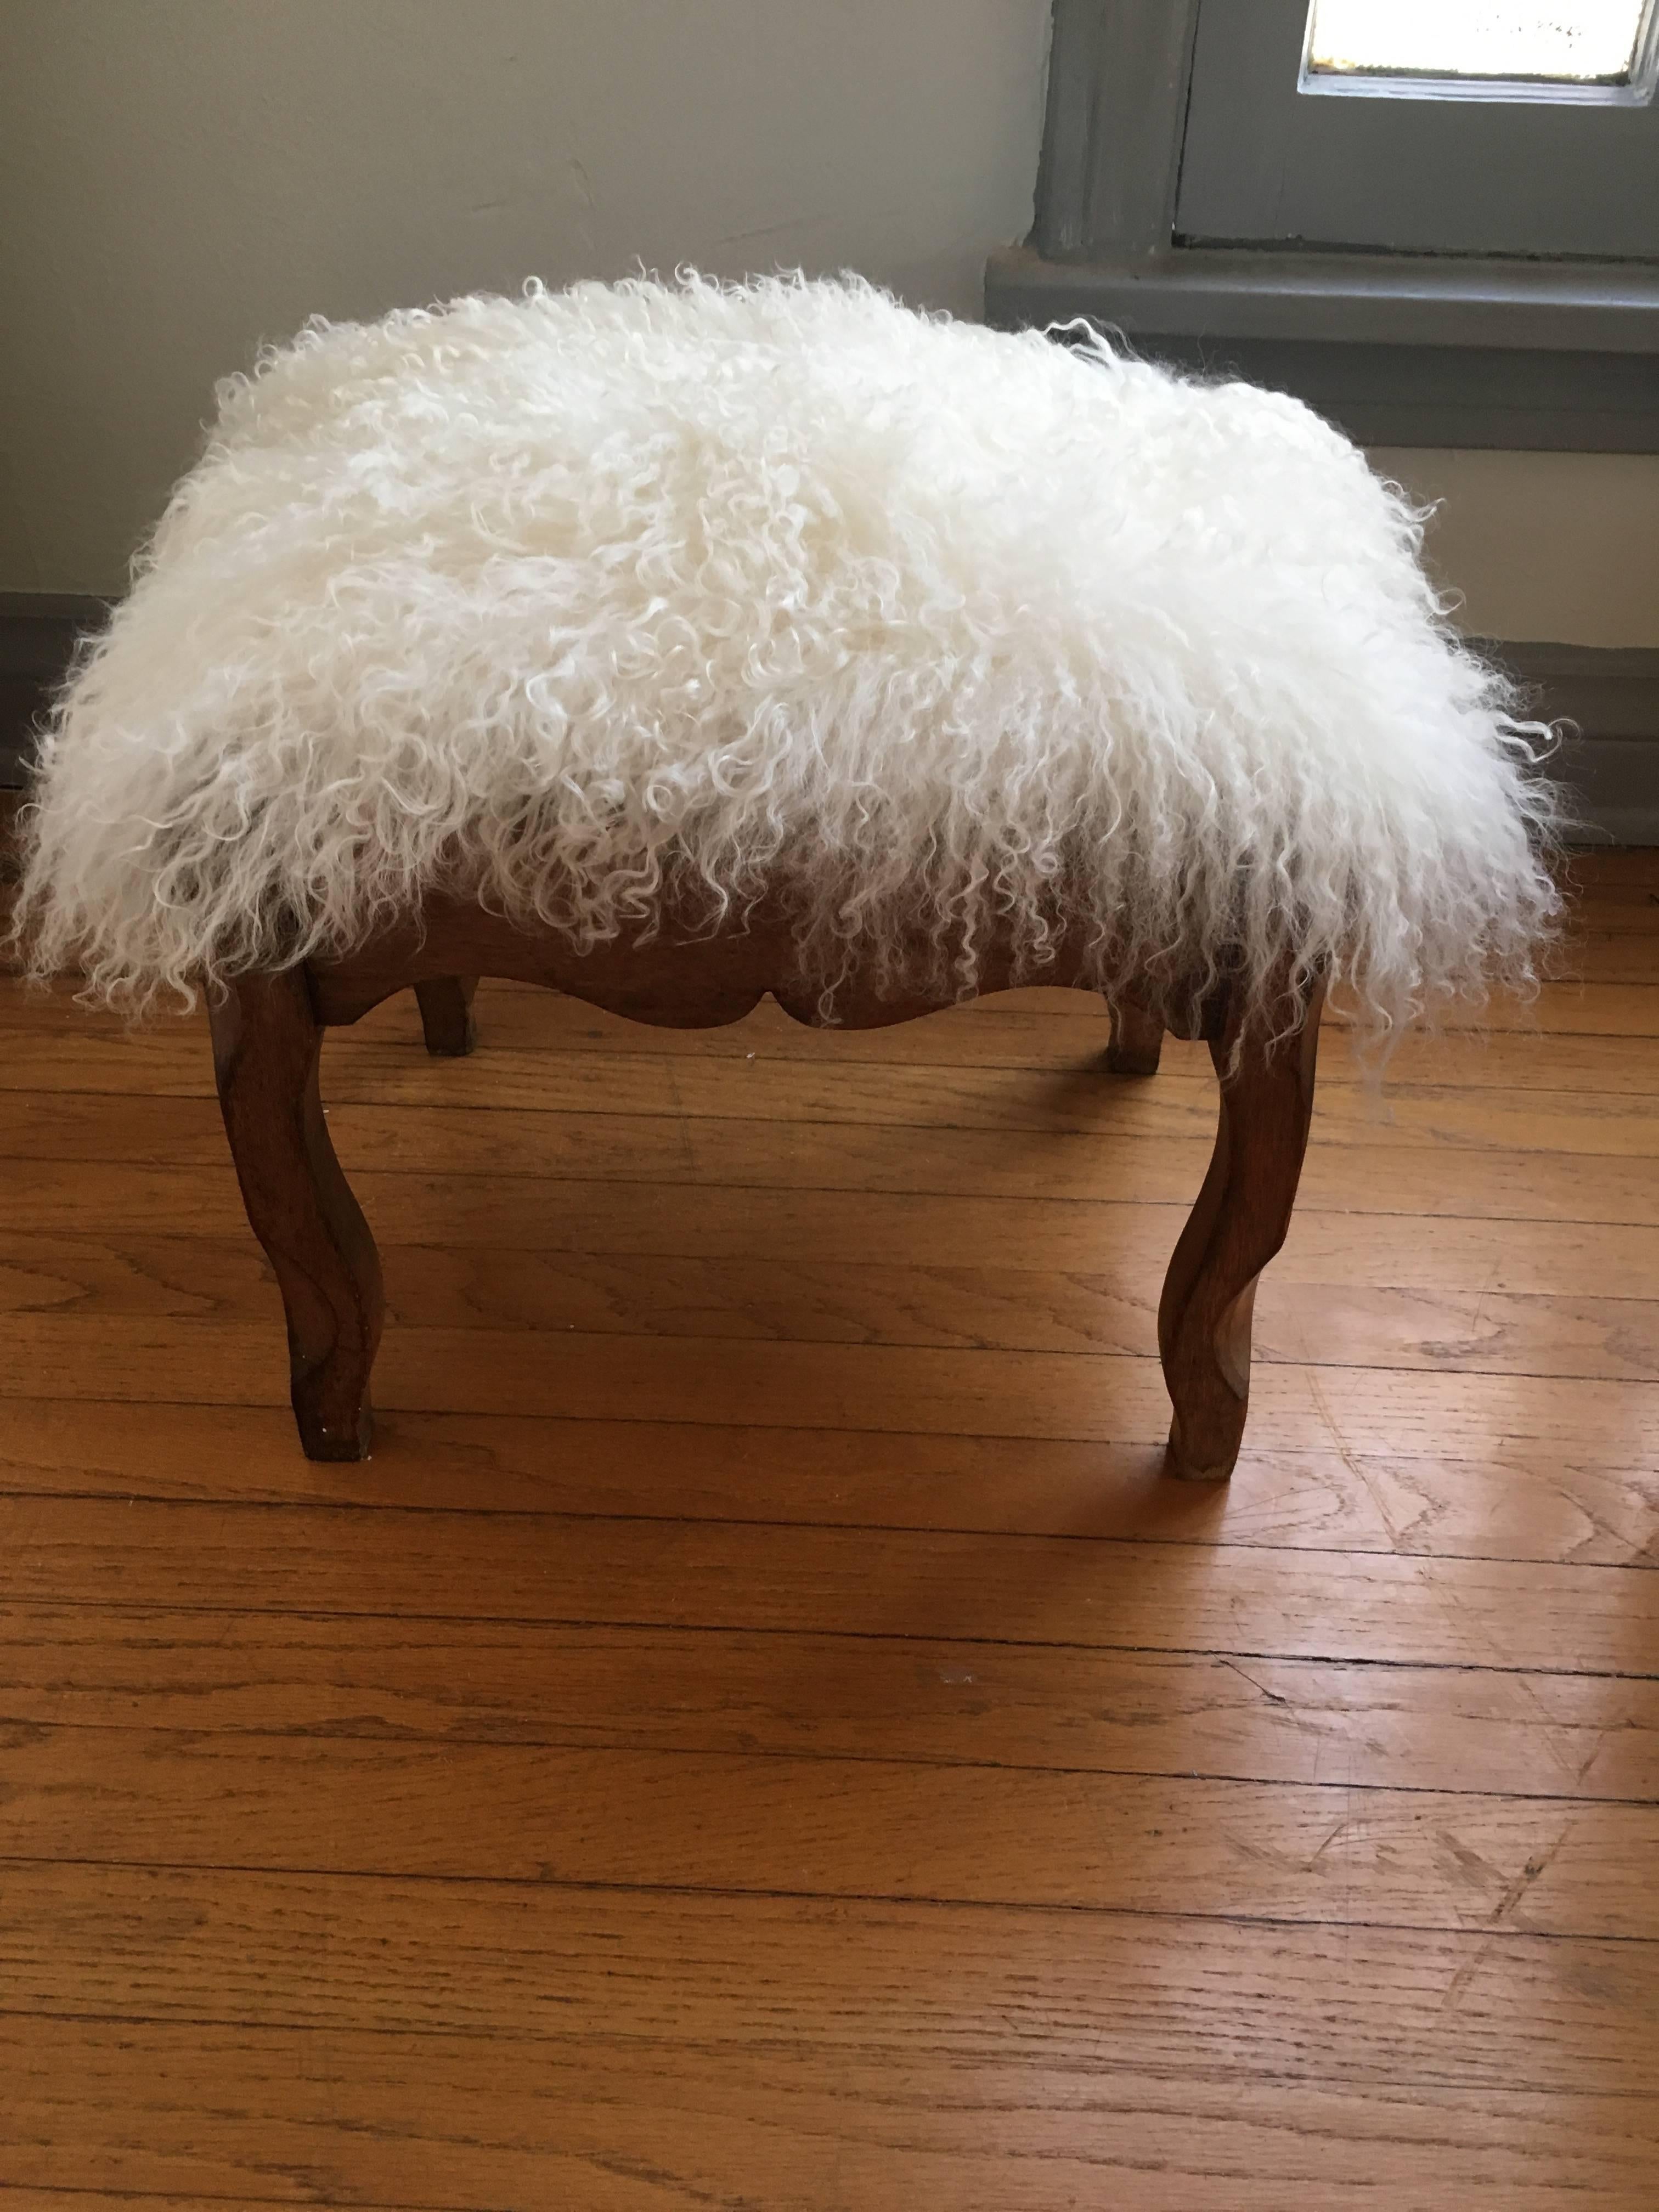 Carved step stool covered in Mongolian Yak fur. Perfect for a small statement piece and to, of course, rest your feet!